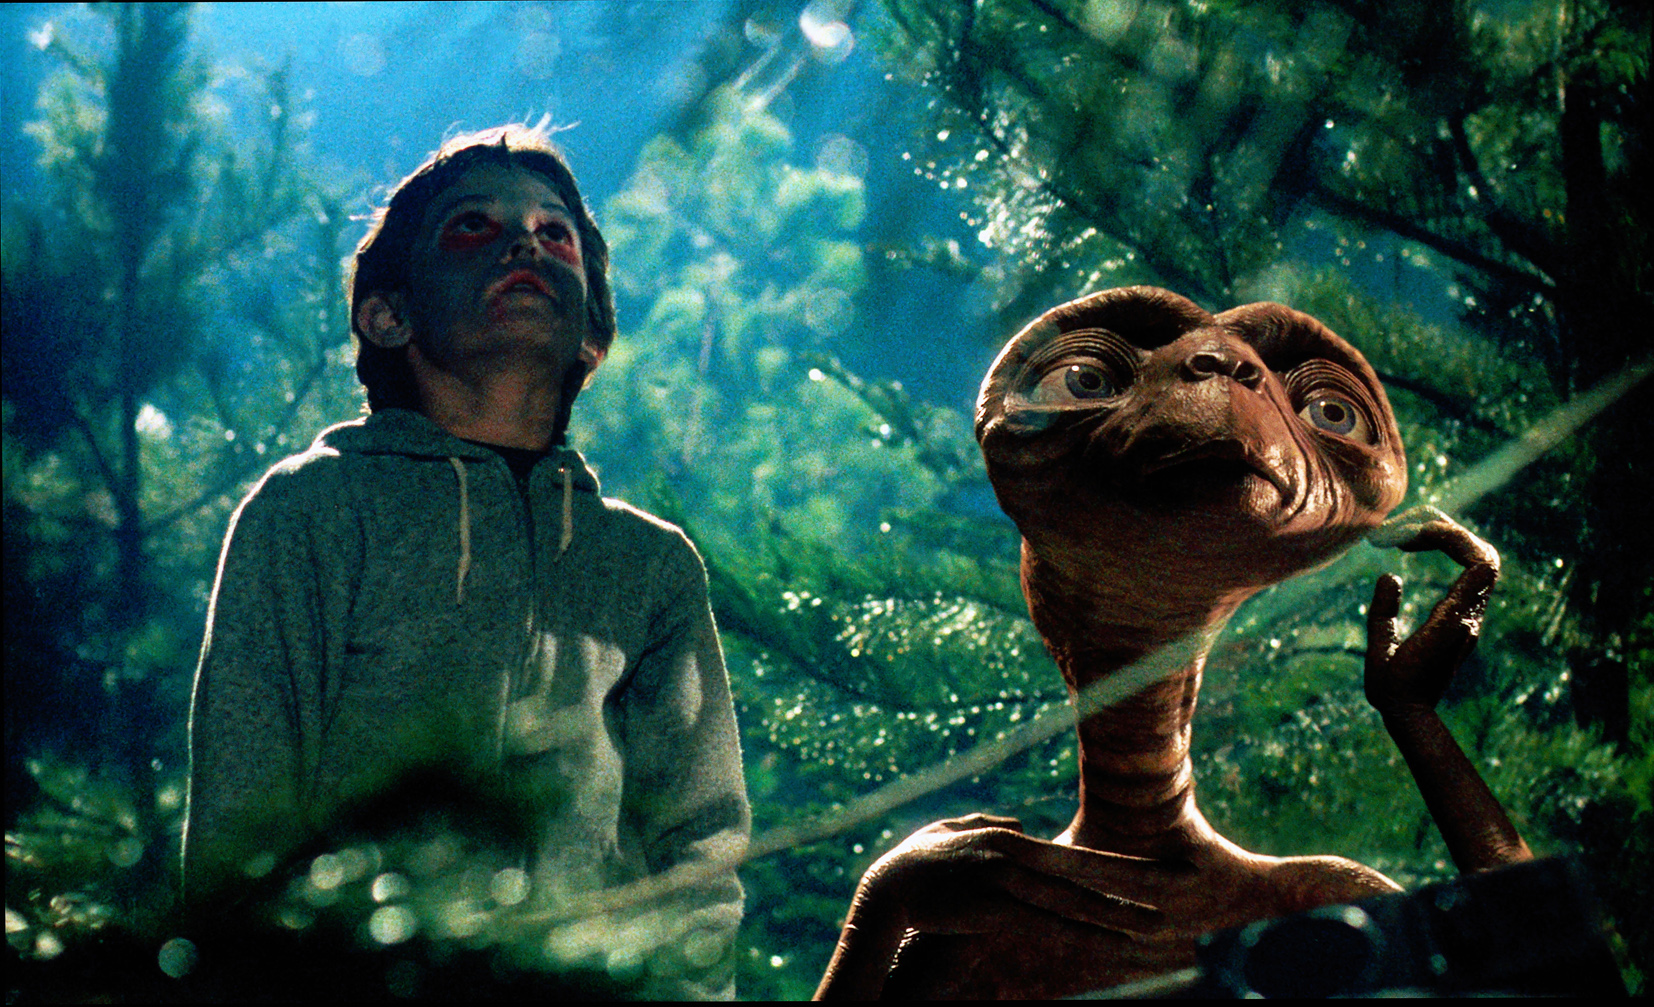 E.T. was voiced by a woman who smoked two packs per day and voiced the part in her regular speaking voice.